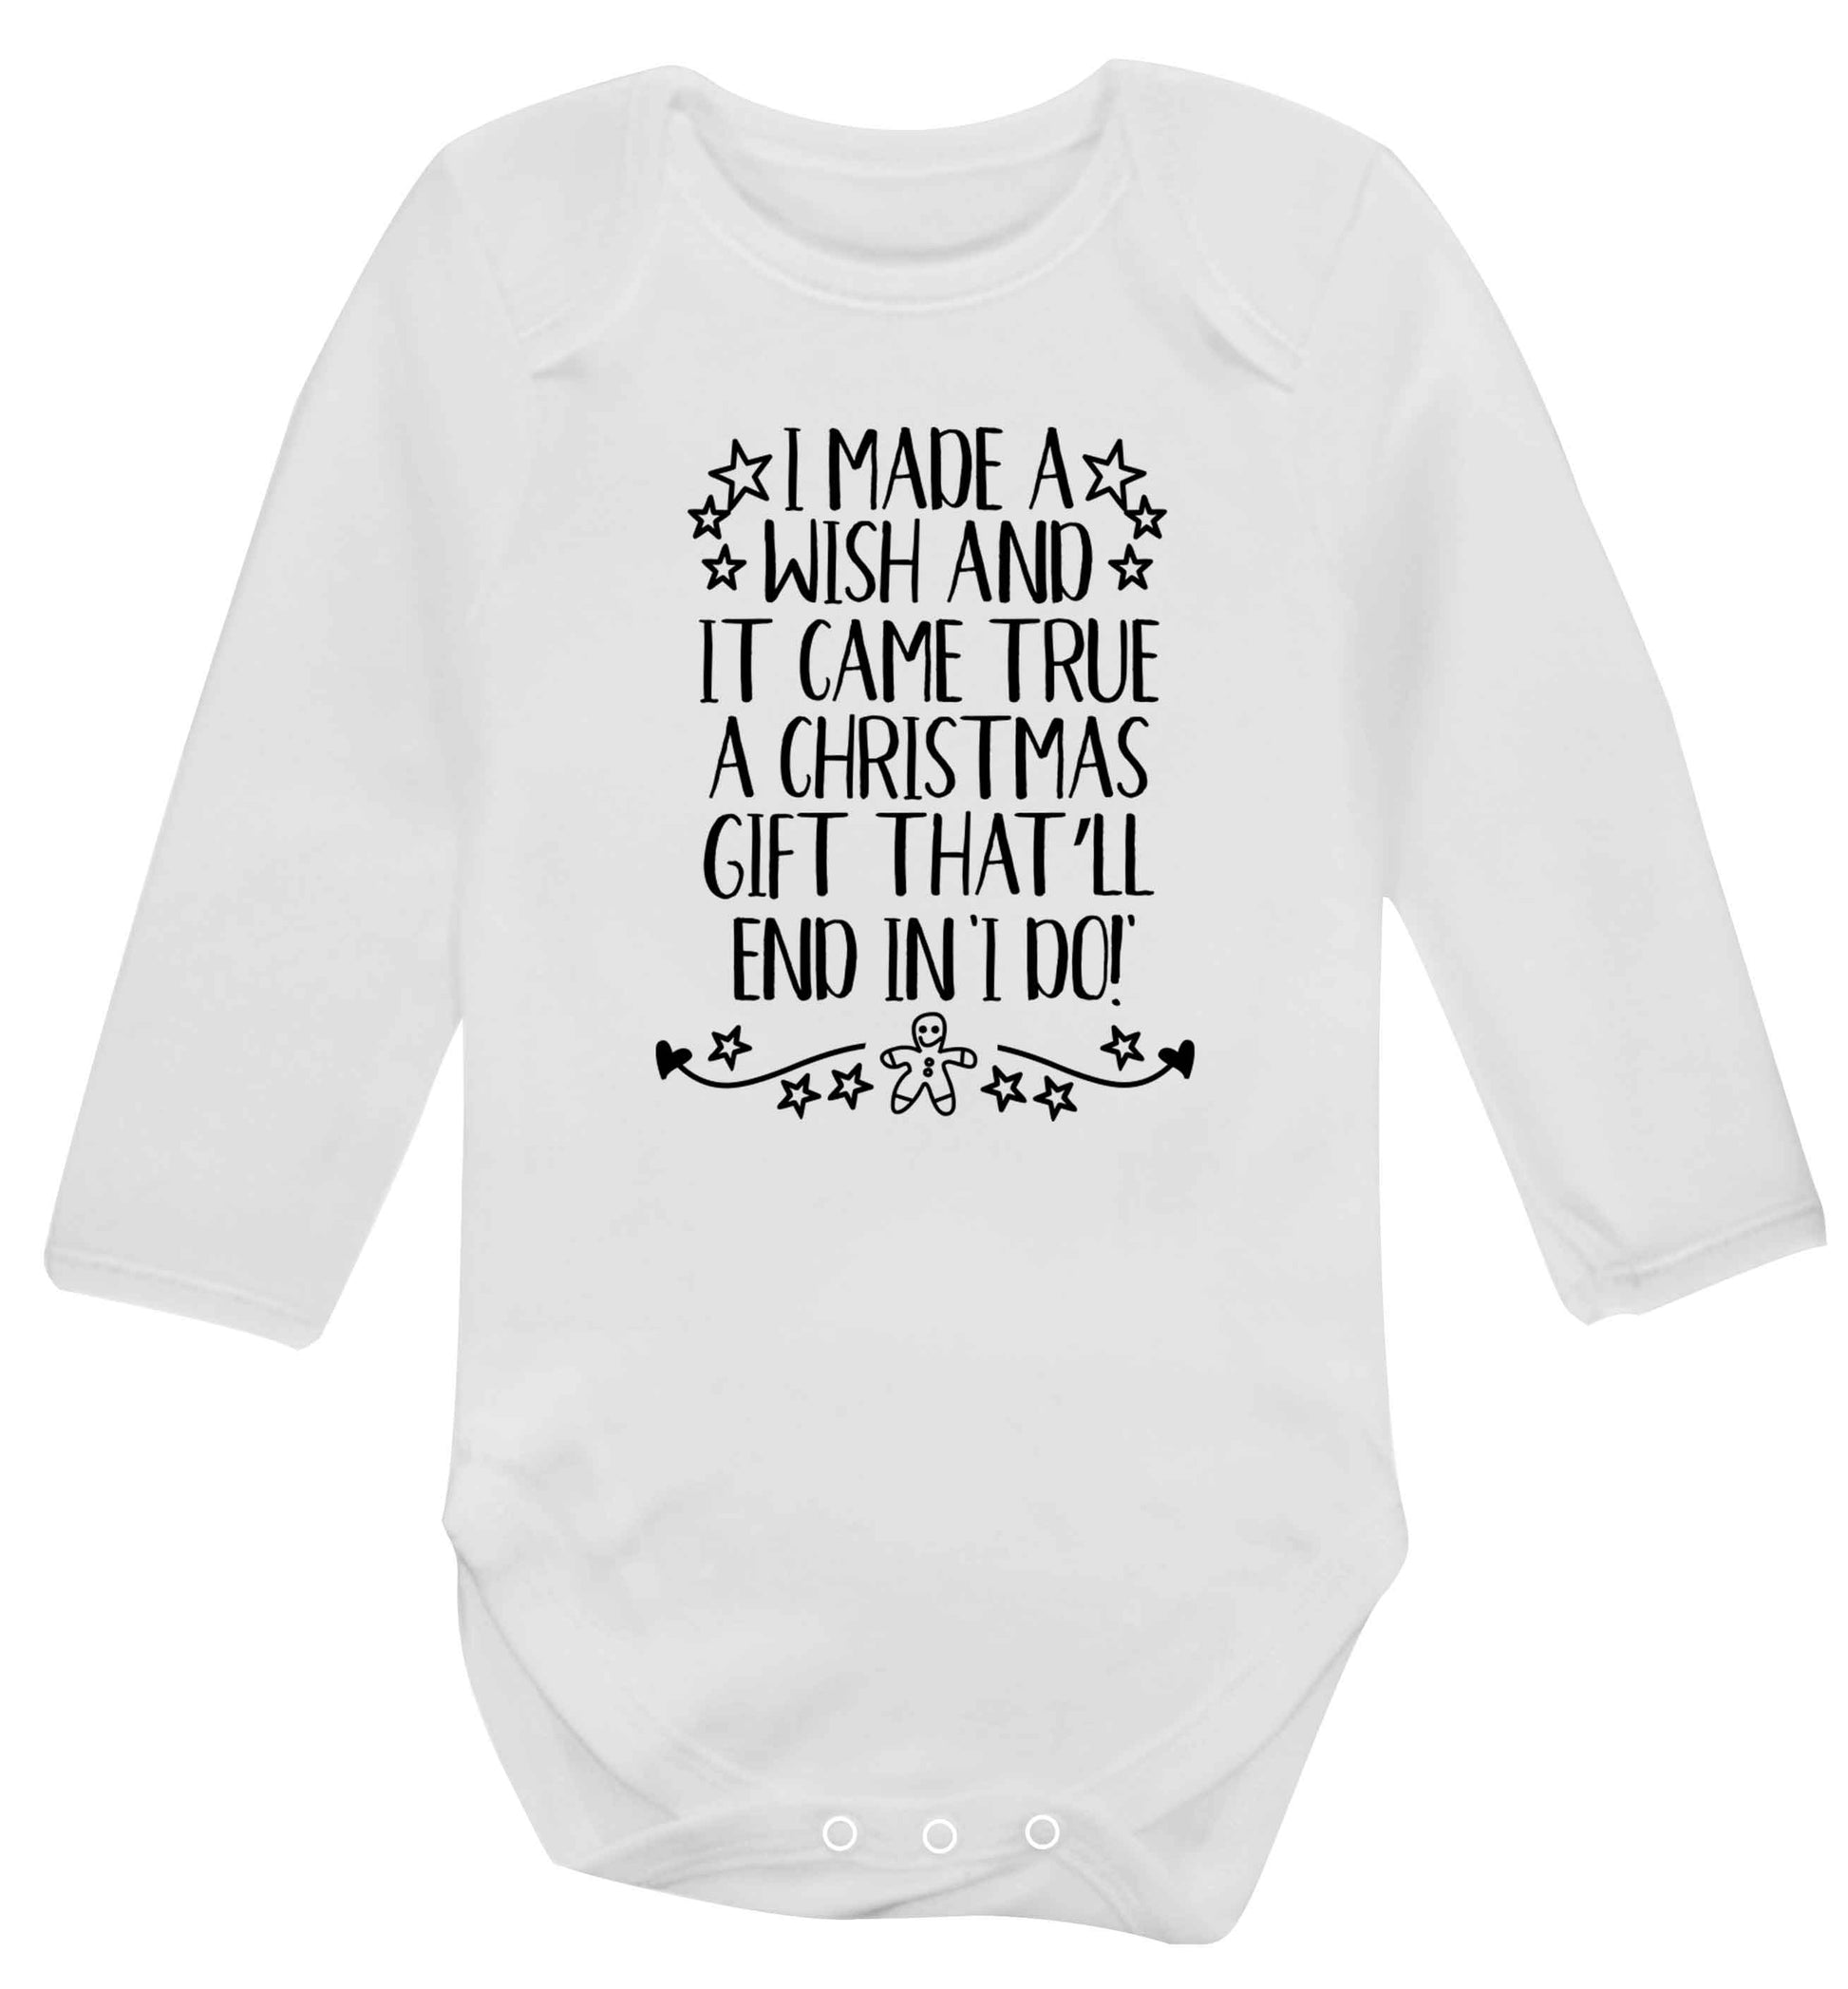 I made a wish and it came true a Christmas gift that'll end in 'I do' Baby Vest long sleeved white 6-12 months